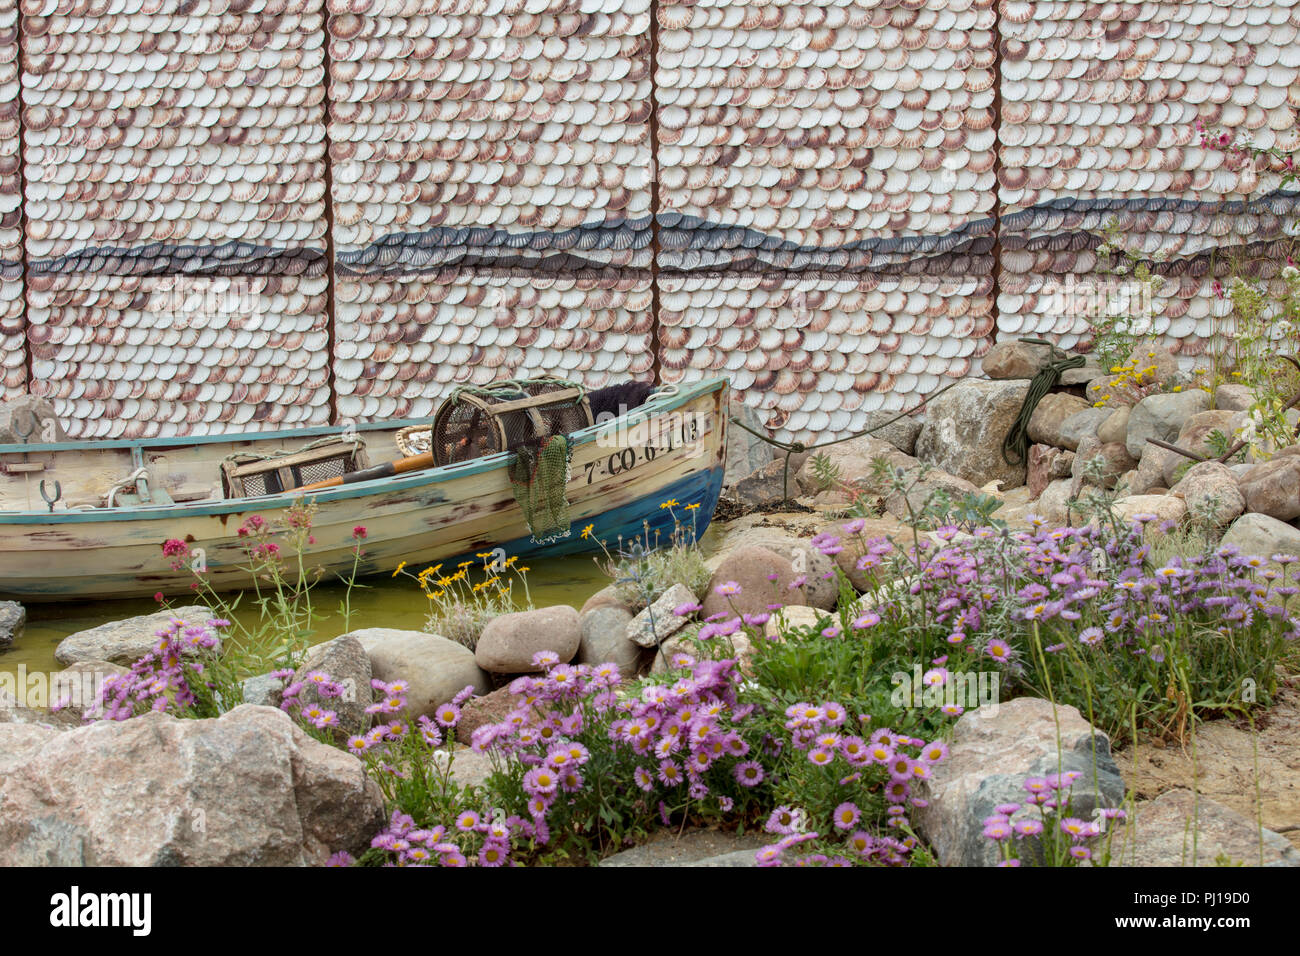 RHS Hampton Court Flower Show 2018, Show Garden representing a Galician secluded cove, traditional shell cladding, rustic boat and lobster pods. Stock Photo